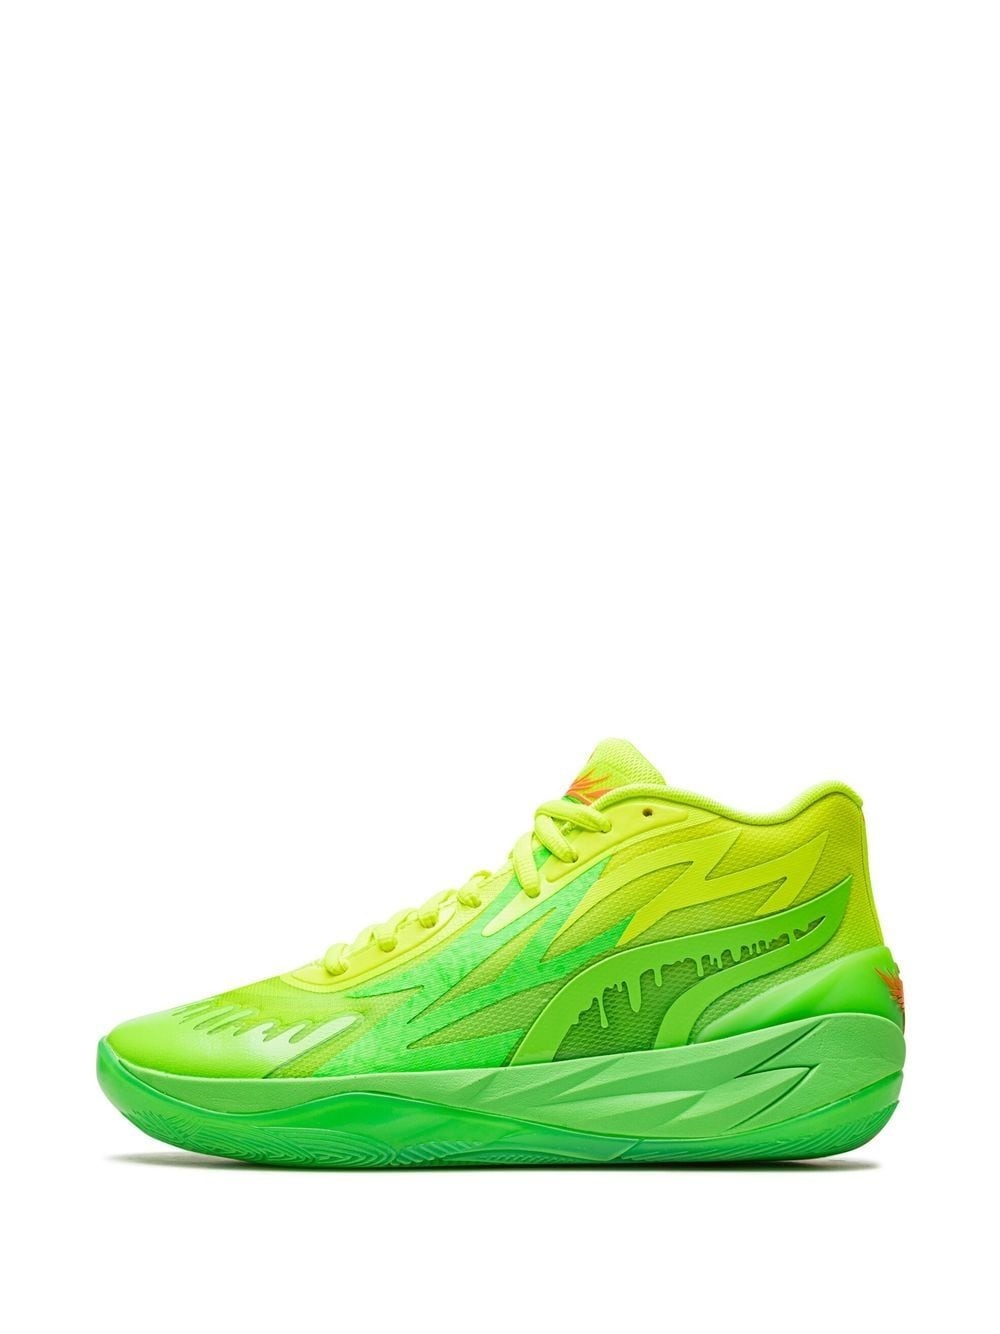 LaMelo Ball MB.02 "Nickelodeon Slime" sneakers - 7